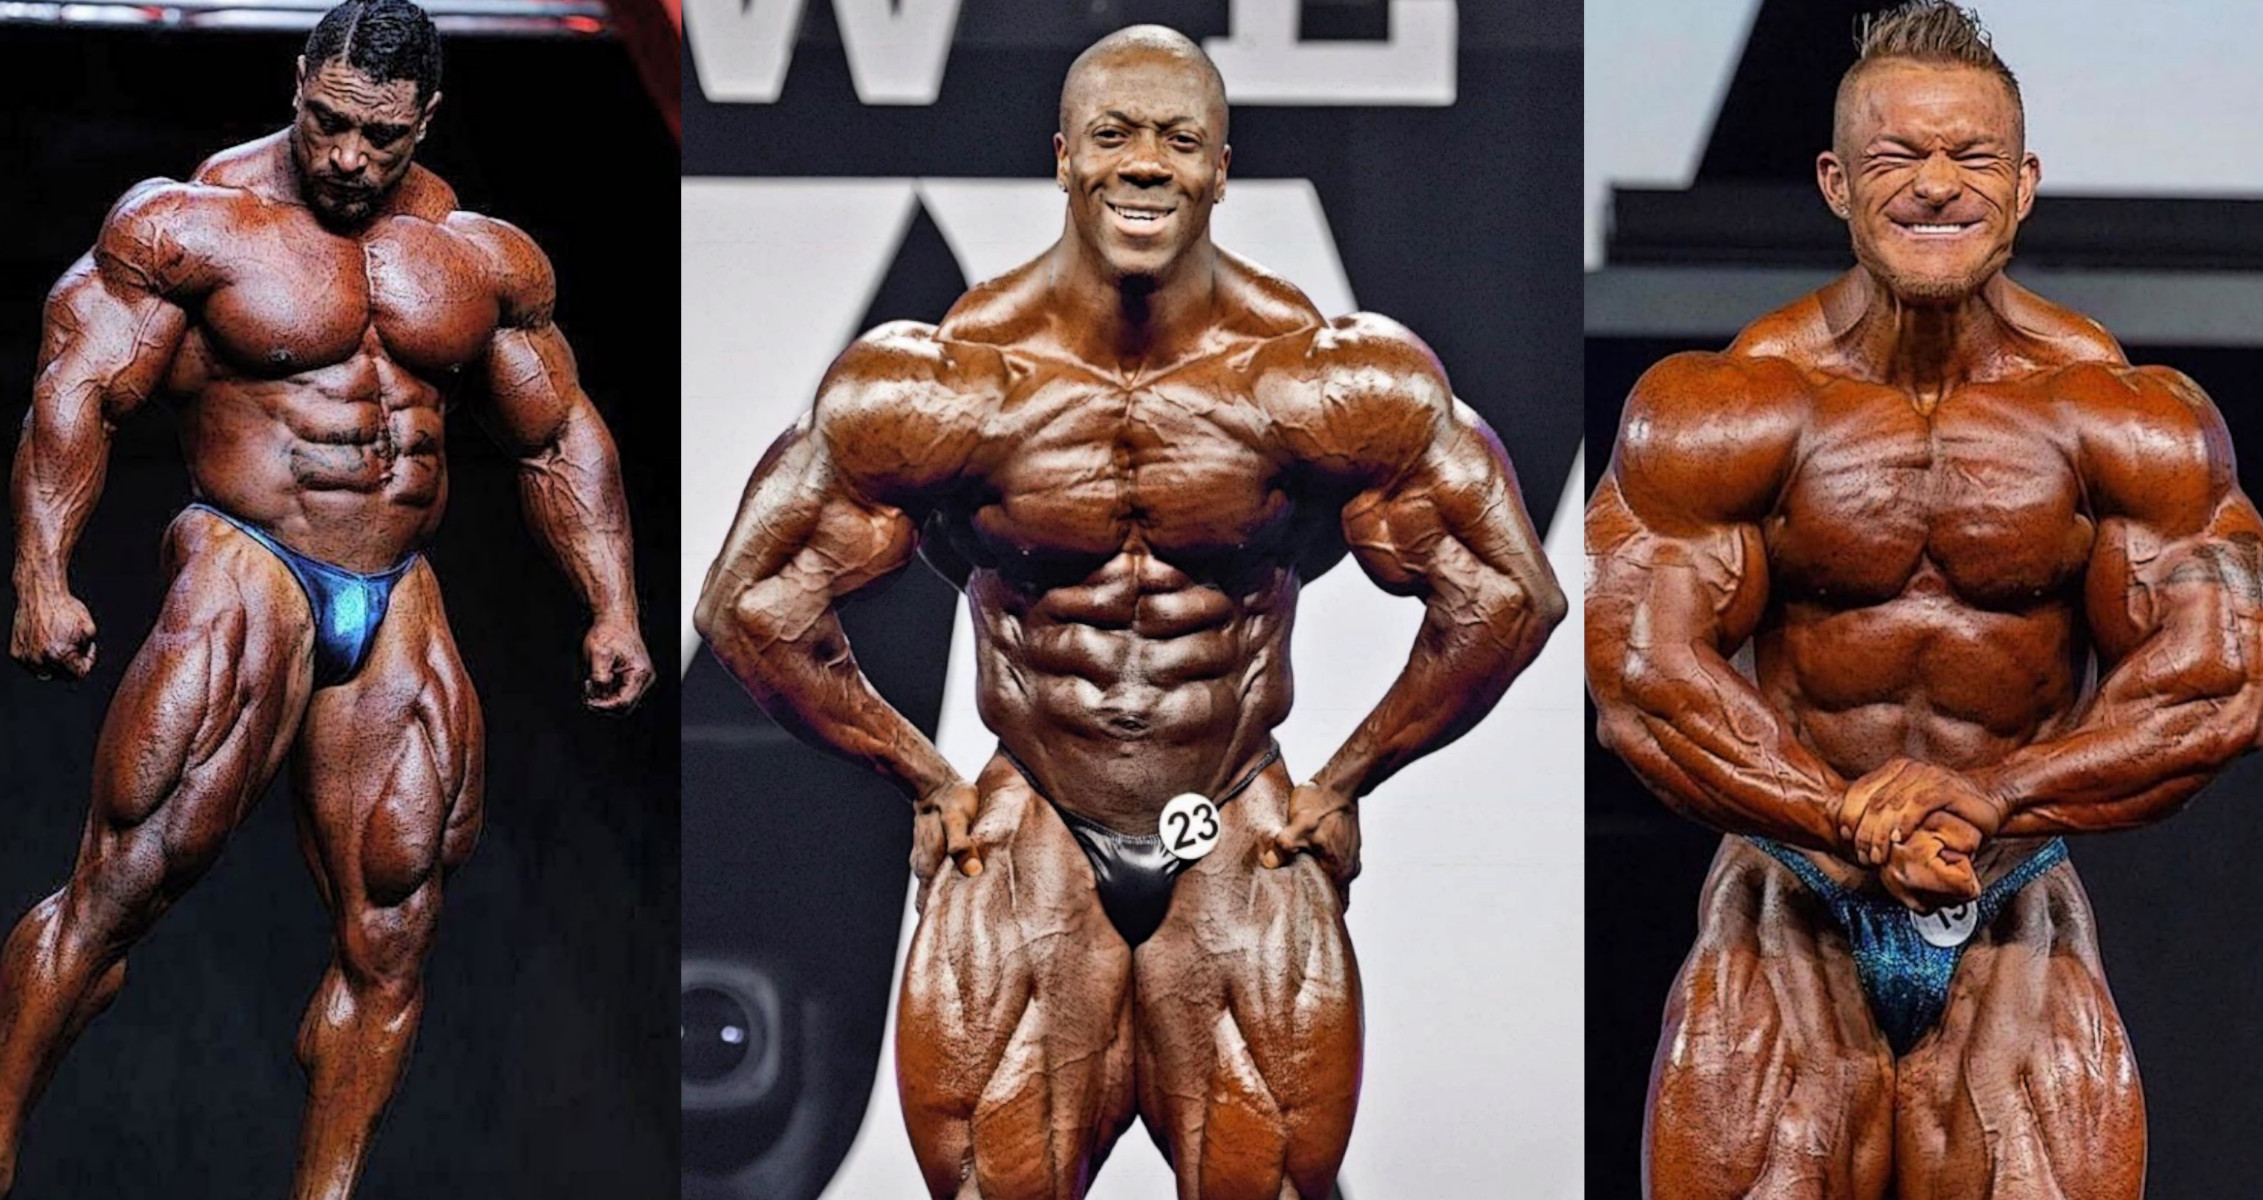 List of Open Bodybuilding Competitors Out of the Olympia